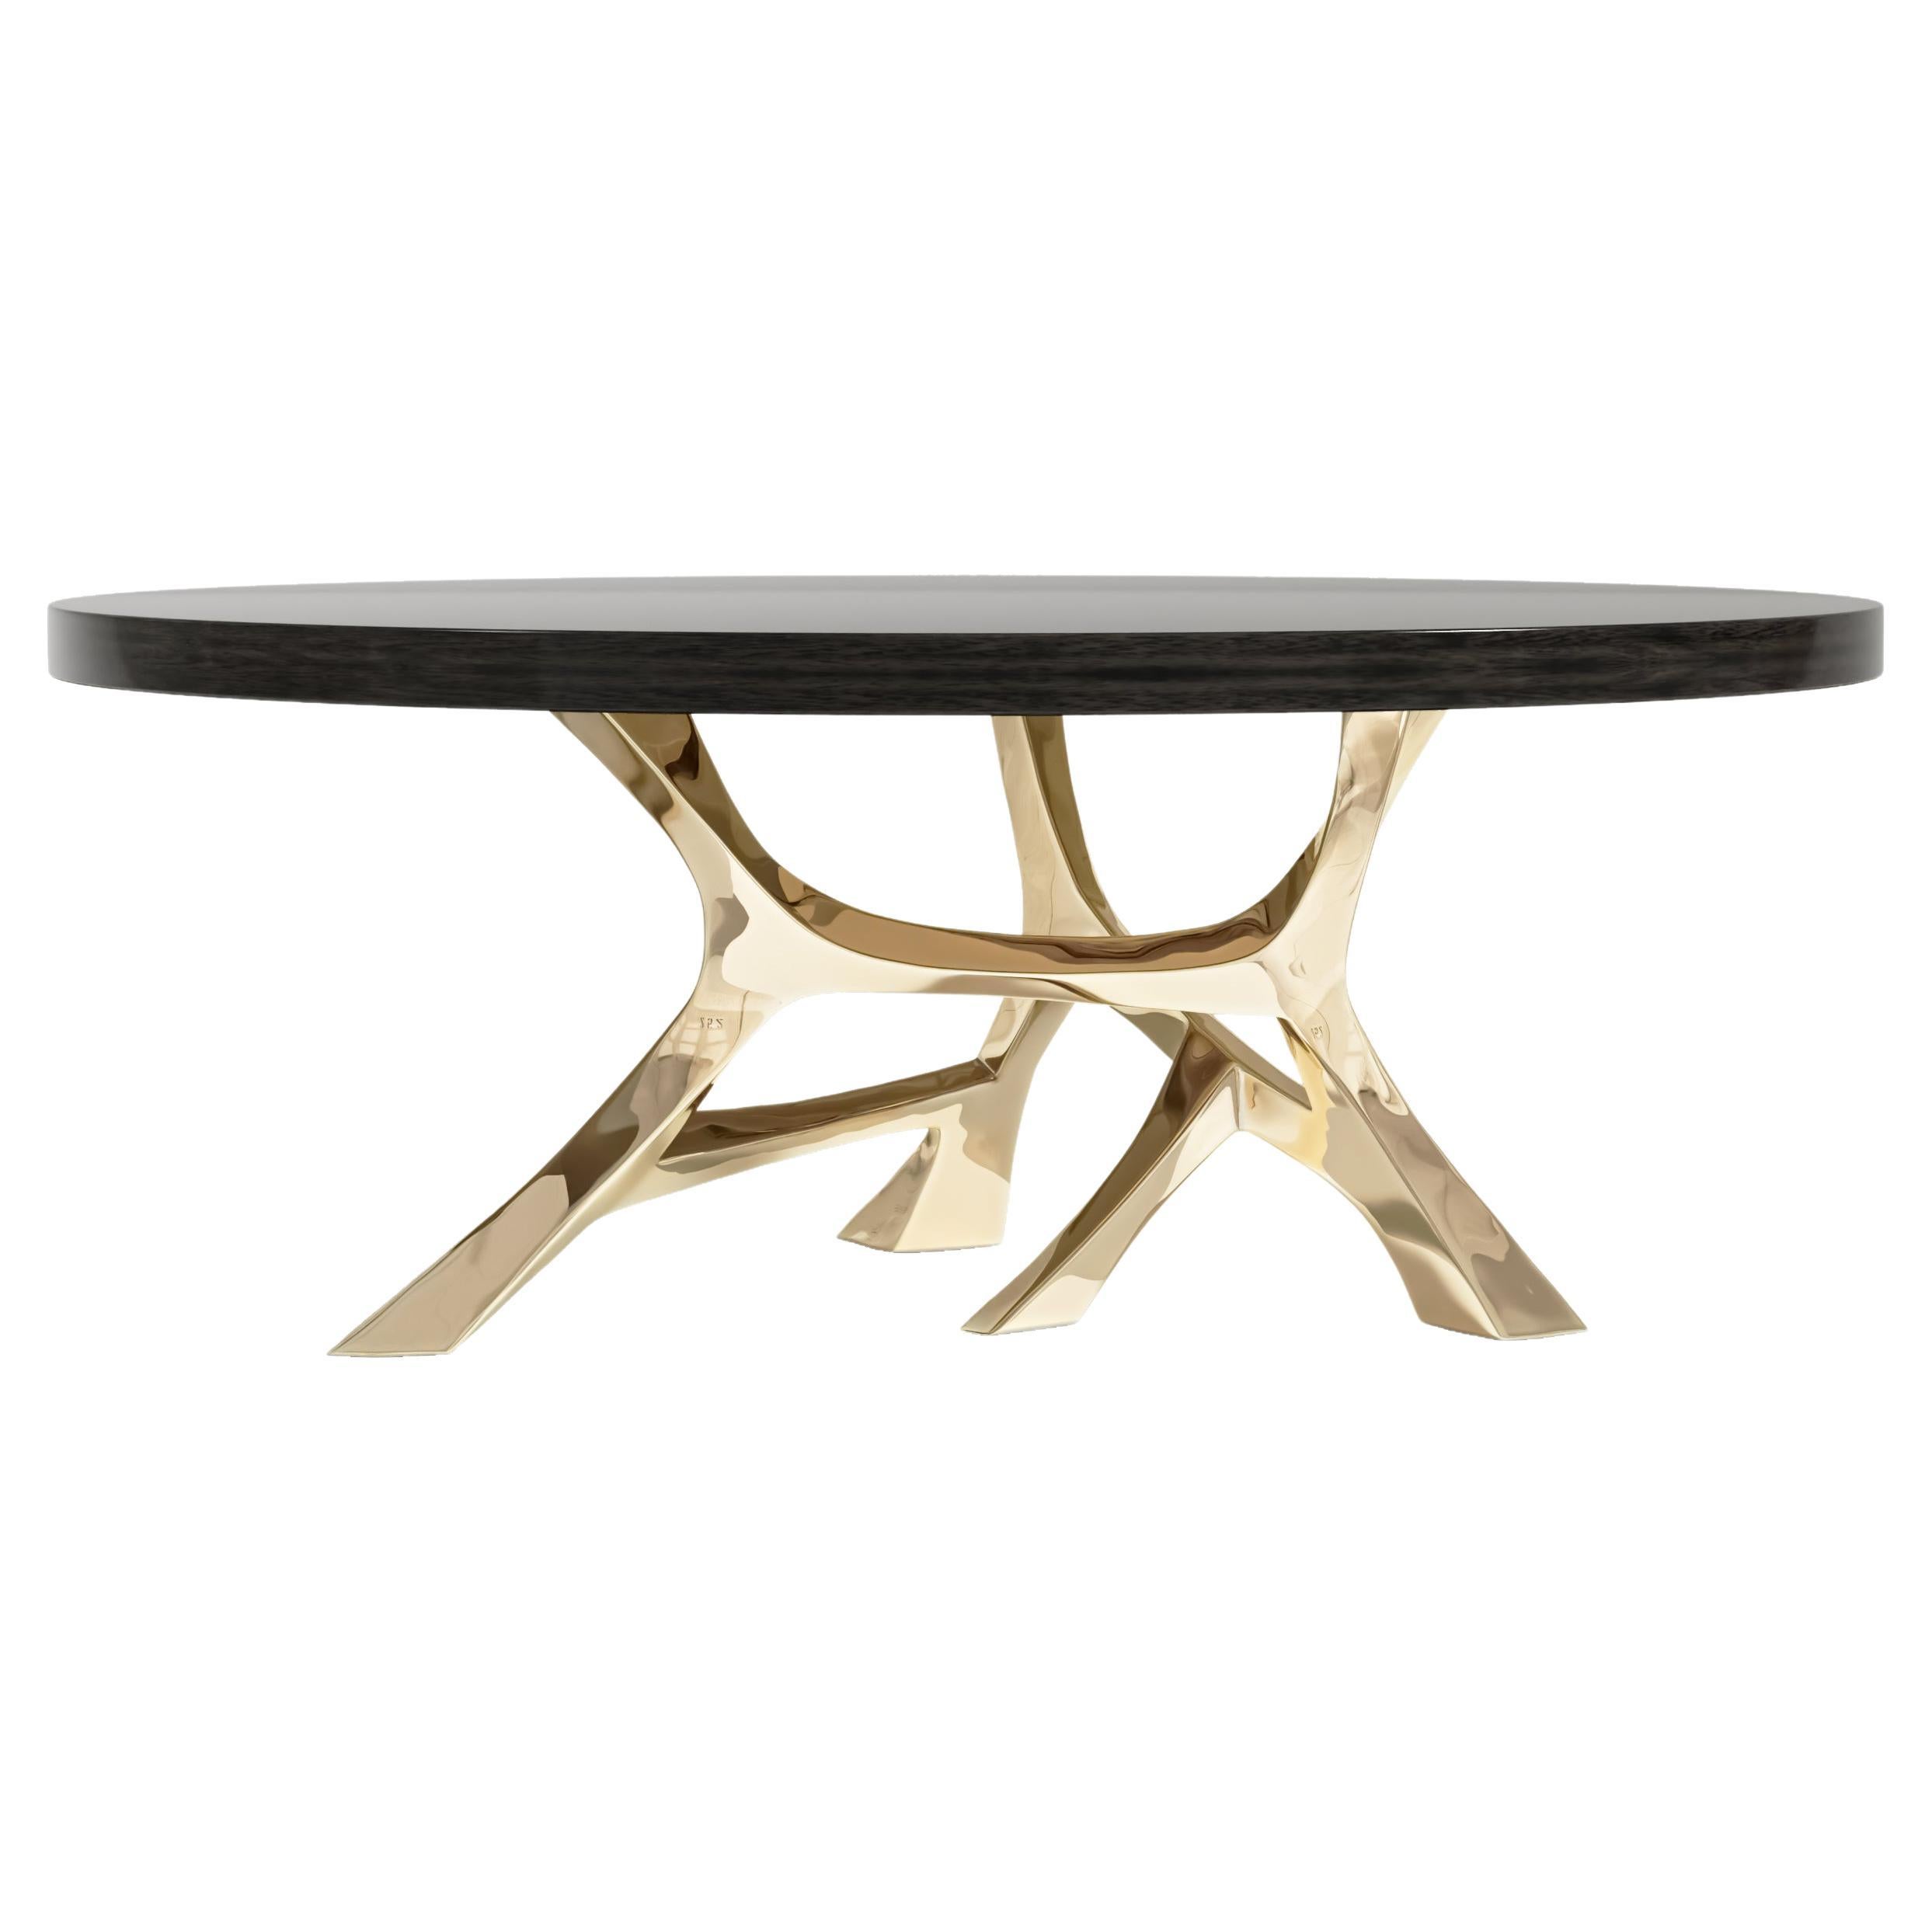 Vena Round Dining Table Polished Bronze and Black Lacquer Tabletop by Palena For Sale